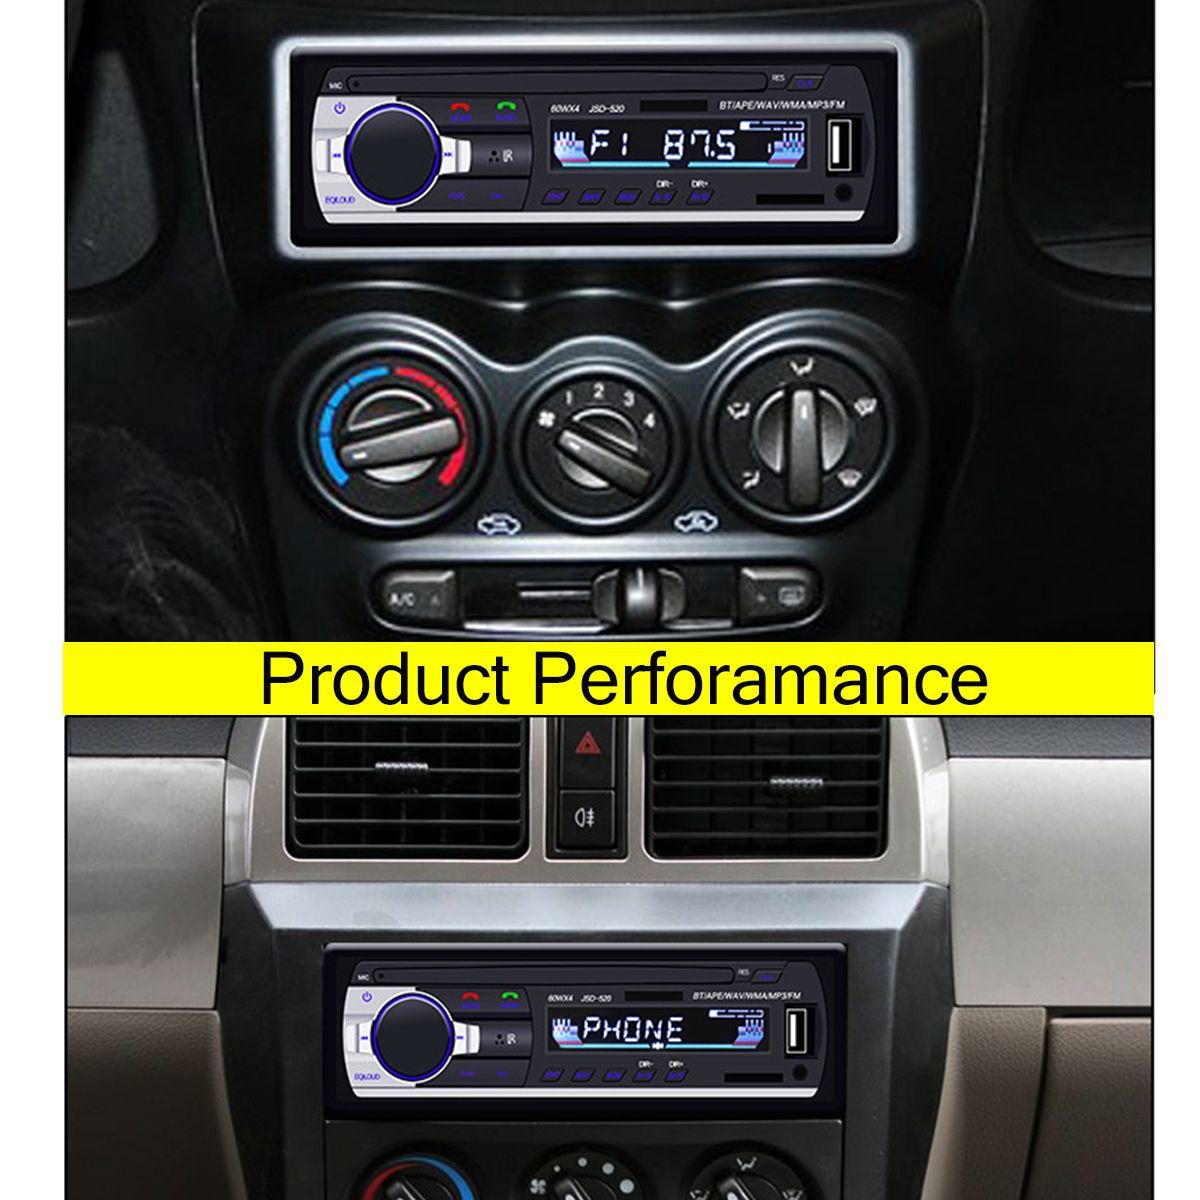 JSD-520-Car-Radio-Stereo-Head-Unit-MP3-Player-bluetooth-Hands-free-With-Remote-Control-AUX-SD-FM-1622191